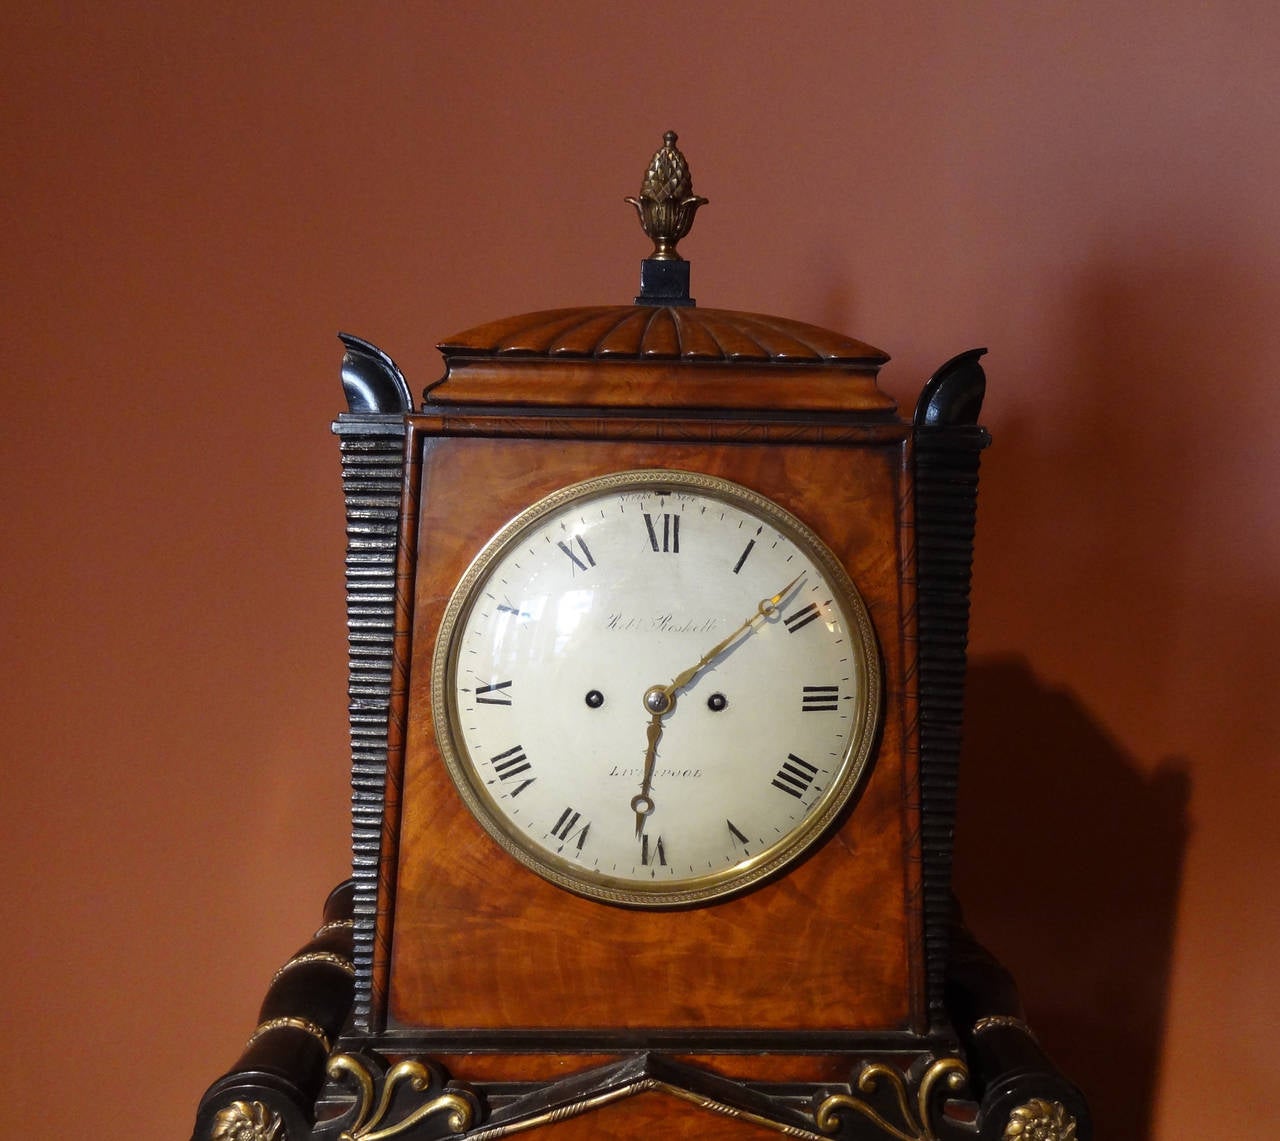 A 19th century English Regency six-tune musical clock, with the movement signed Robert Roskell, Liverpool, and the case attributed to George Bullock. This clock represents a collaboration between two of Liverpool’s most prominent creators during the